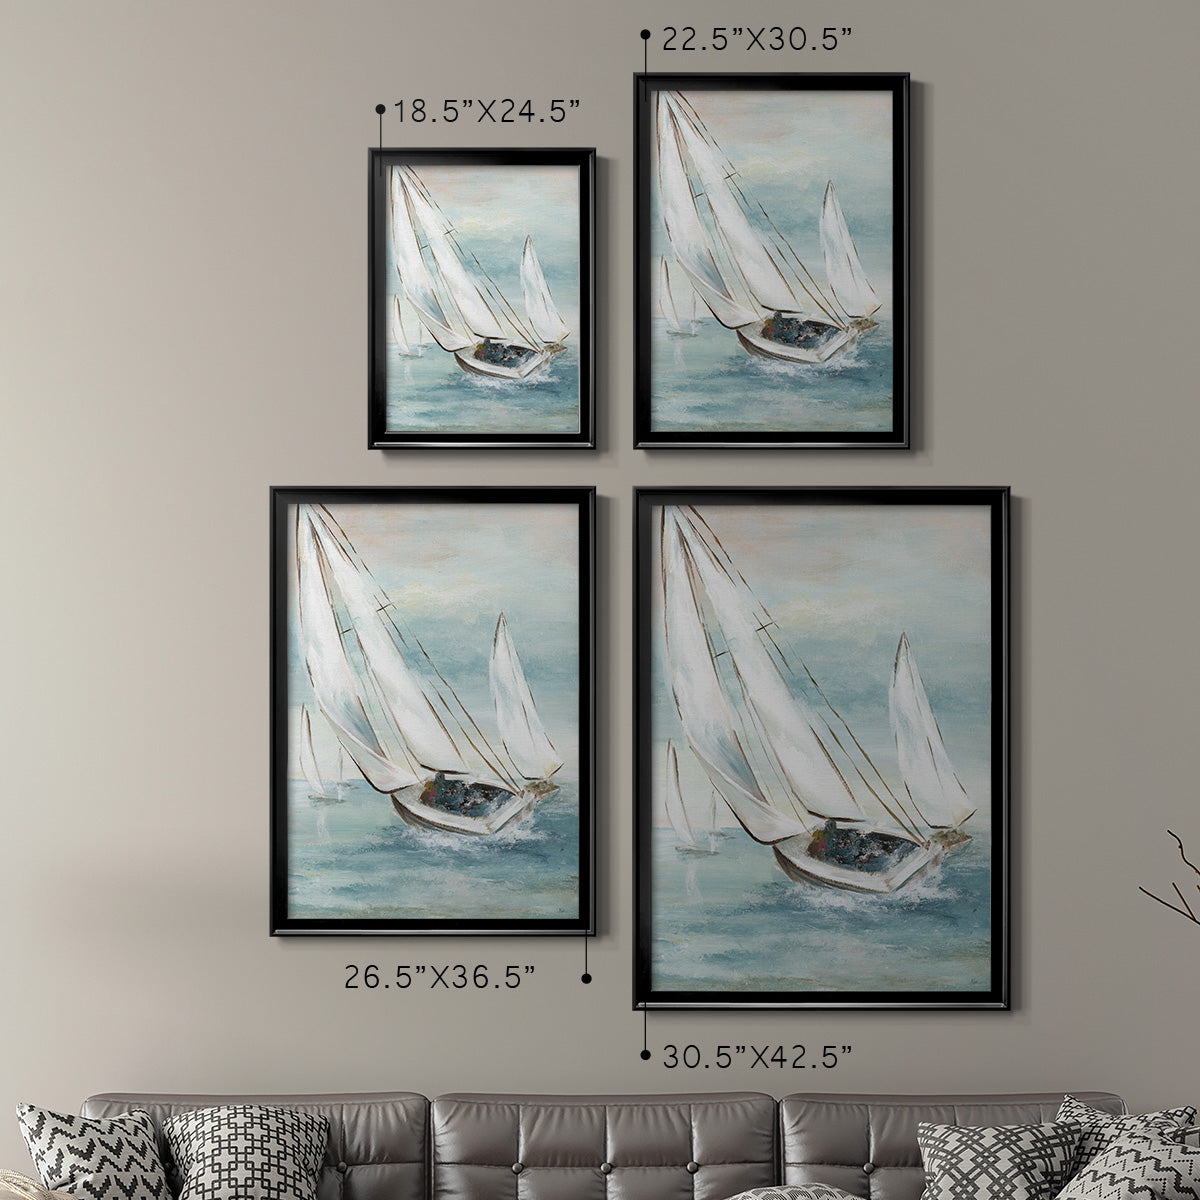 Catching Wind Premium Framed Print - Ready to Hang